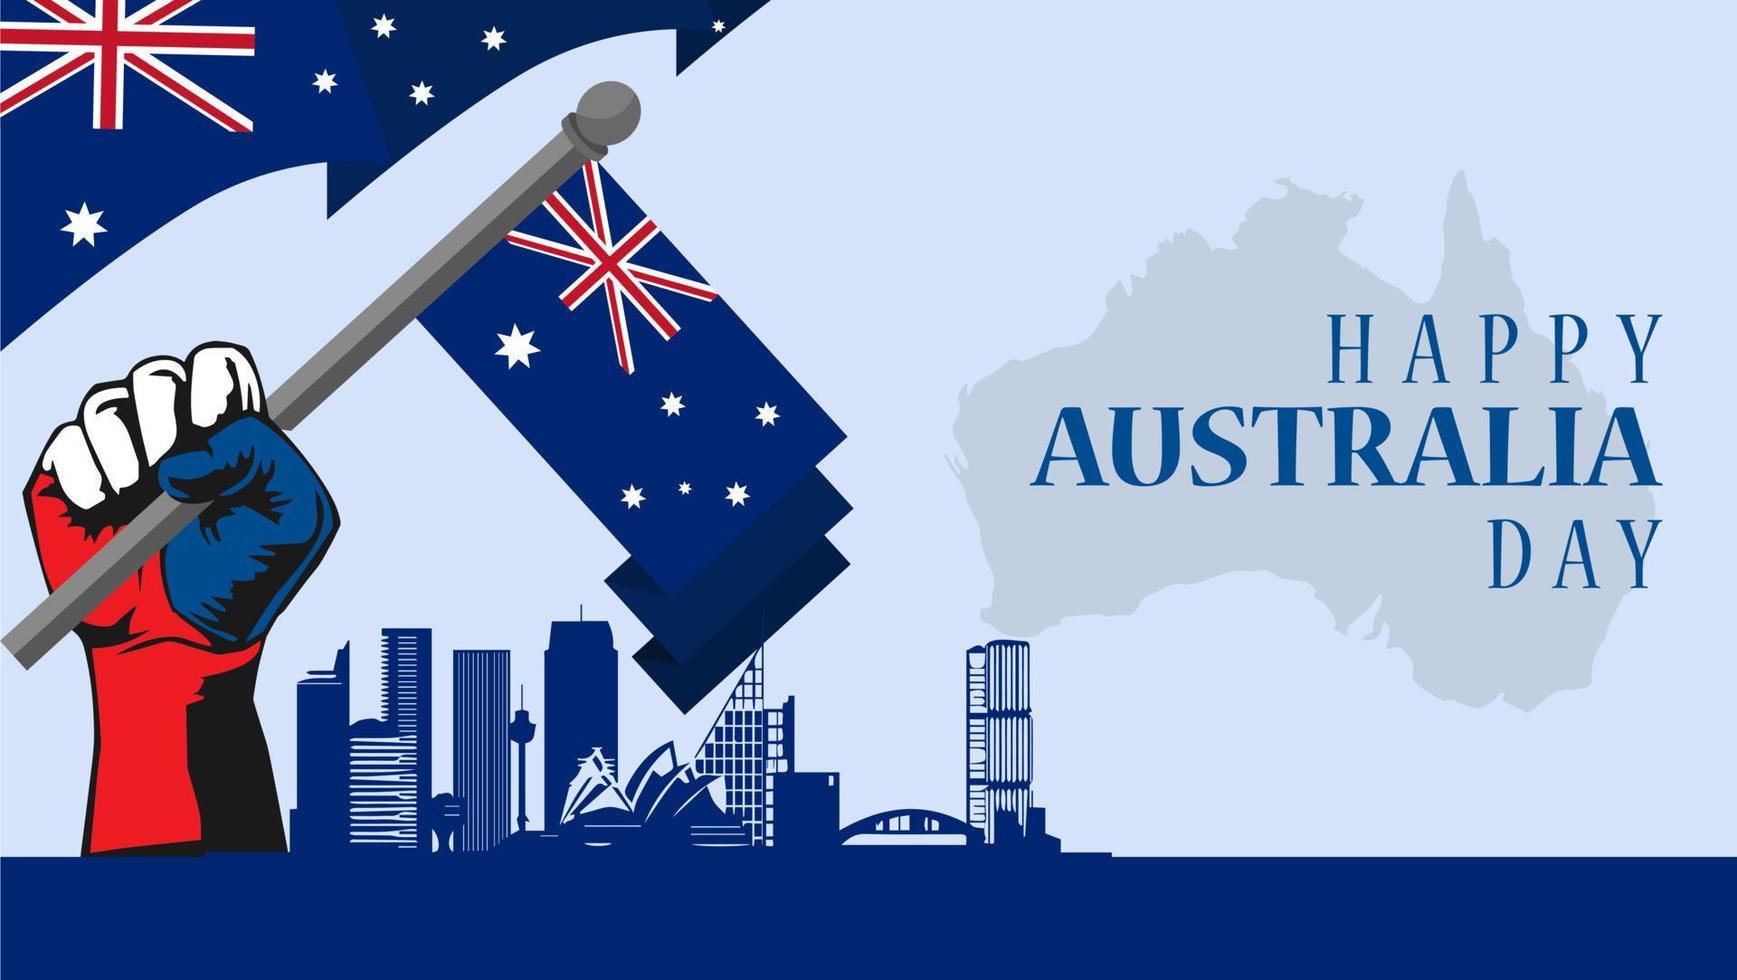 Happy Australia Day, indepenence day. City Background and Flag Illustration and Vector Elements National Concept Greeting Card, Poster or Web Banner Design